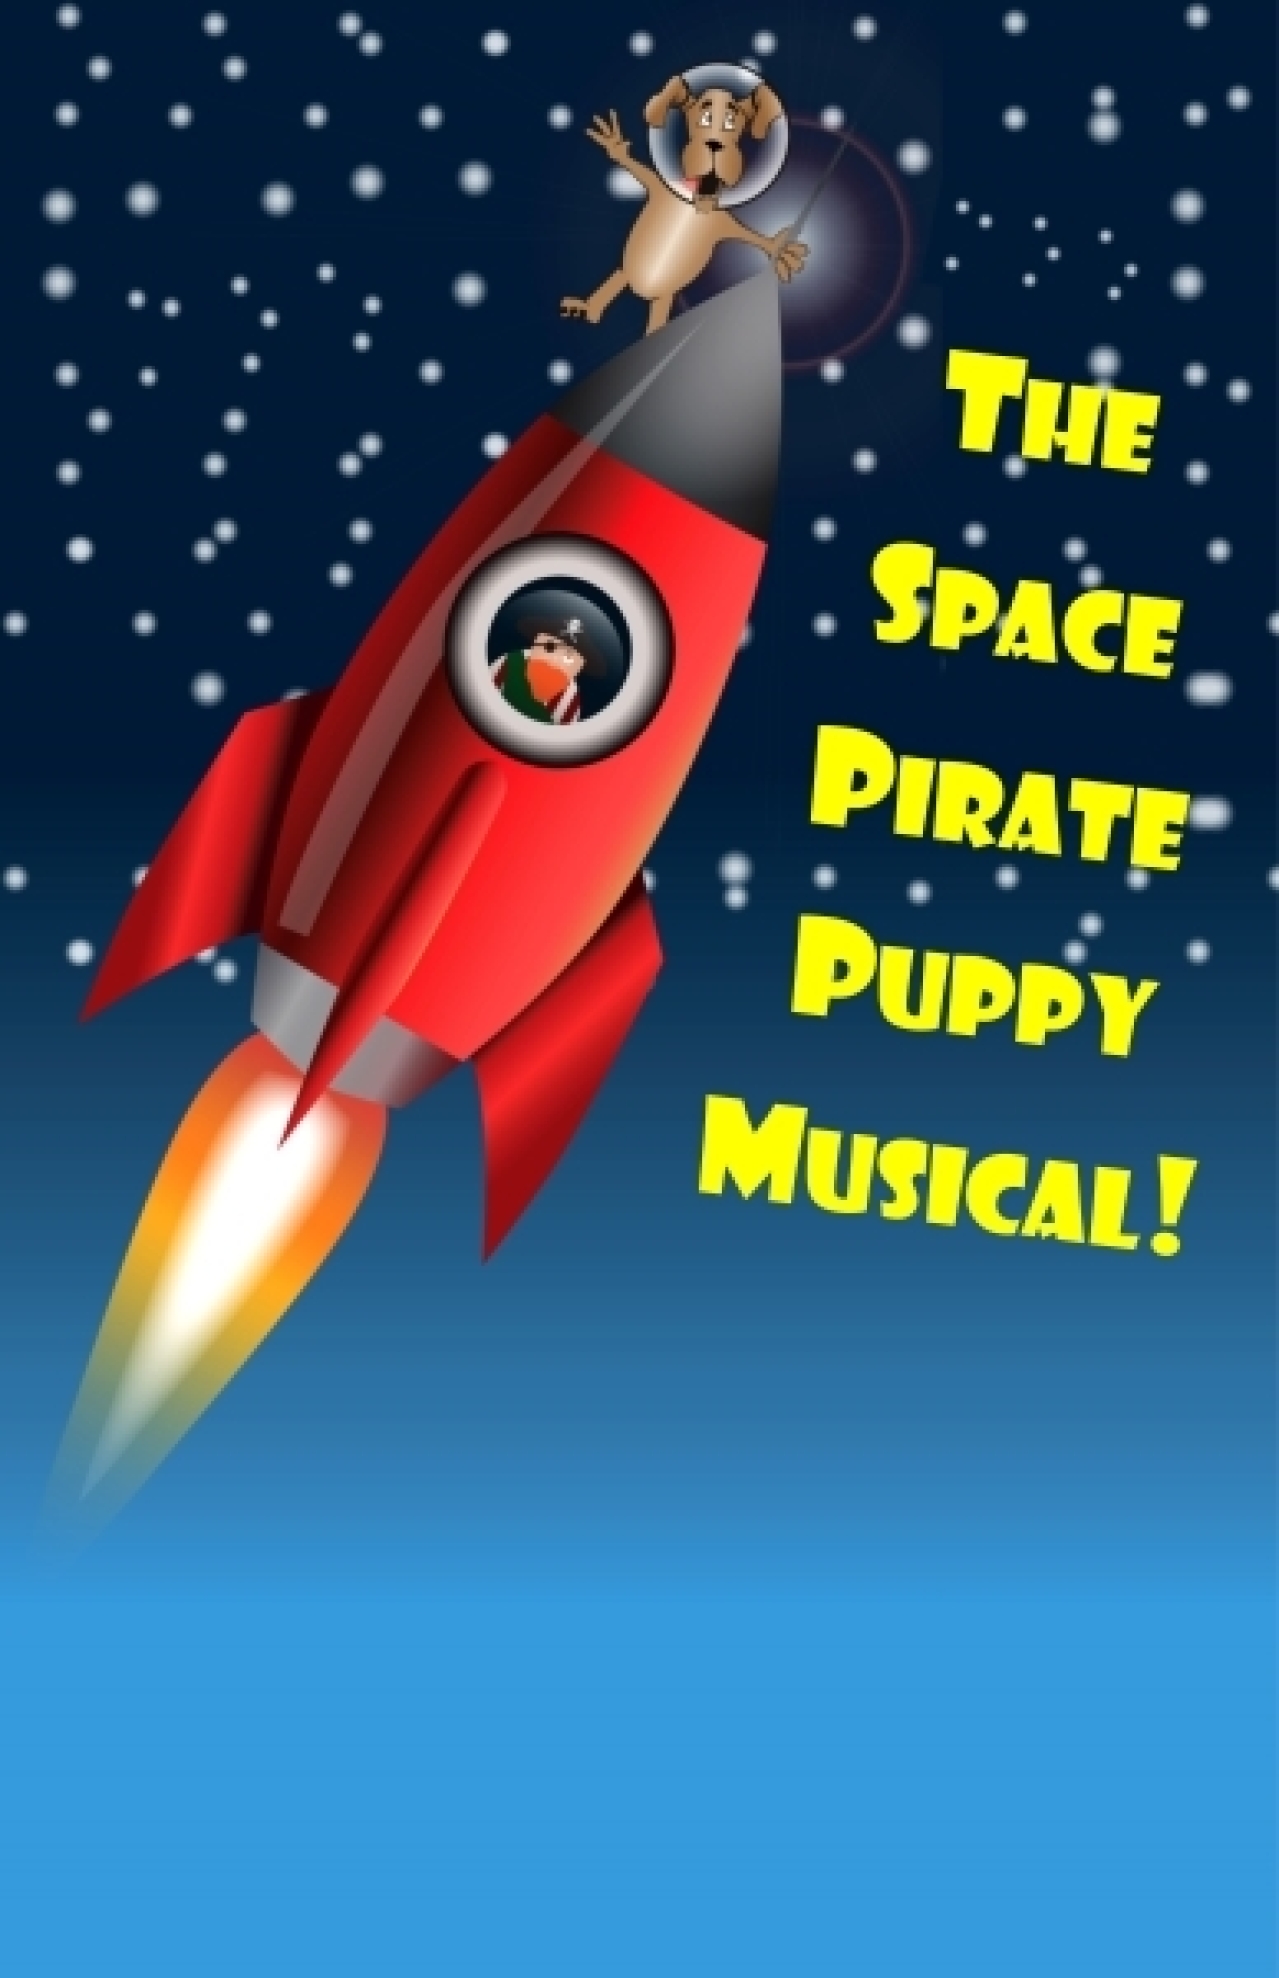 the space pirate puppy musical logo 63901